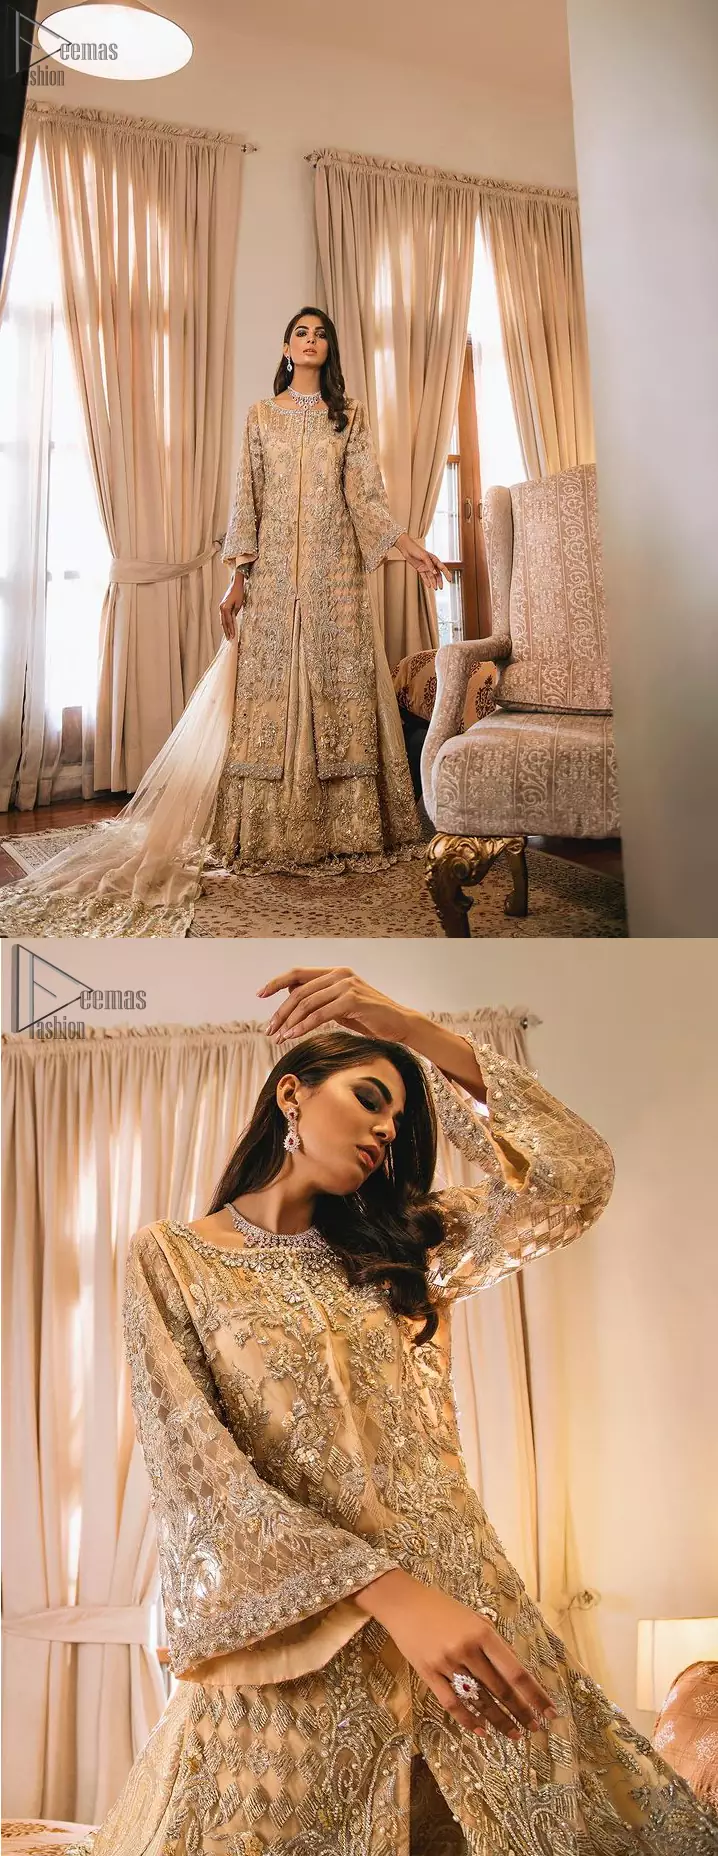 An unforgettable look and ideal for the festive season. An elegant yet trendy front open style makes this outfit more classy. Crafted artfully with detailed zardozi work and illusion neckline finessed with kora, dabka, and Kundan. The motifs and intricate details are a true example of decorative and ornamental expression stylized in a contemporary way. The bell sleeves make this outfit more classy. Balance the look with banarsi lehenga highlighted with embroidered borders at the bottom. The dupatta is enhanced with embroidered pallu.
